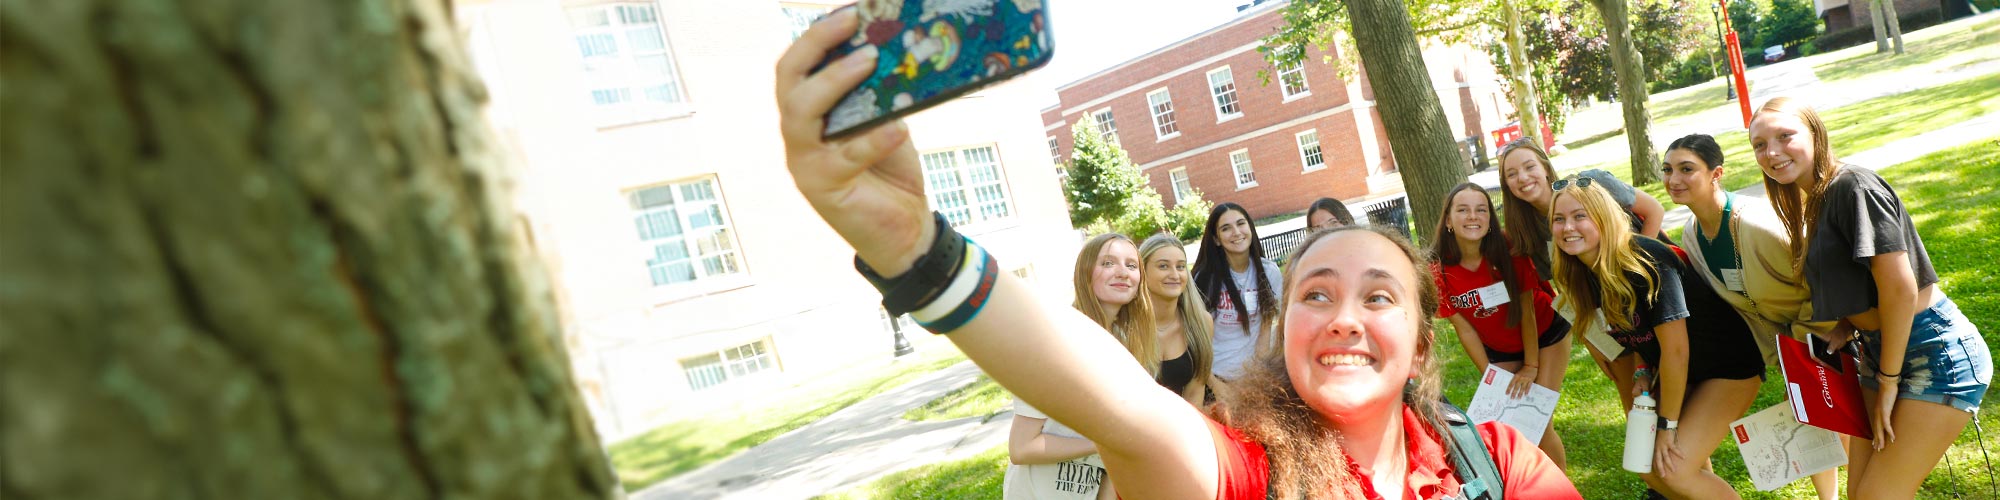 Orientation students pause for a group selfie